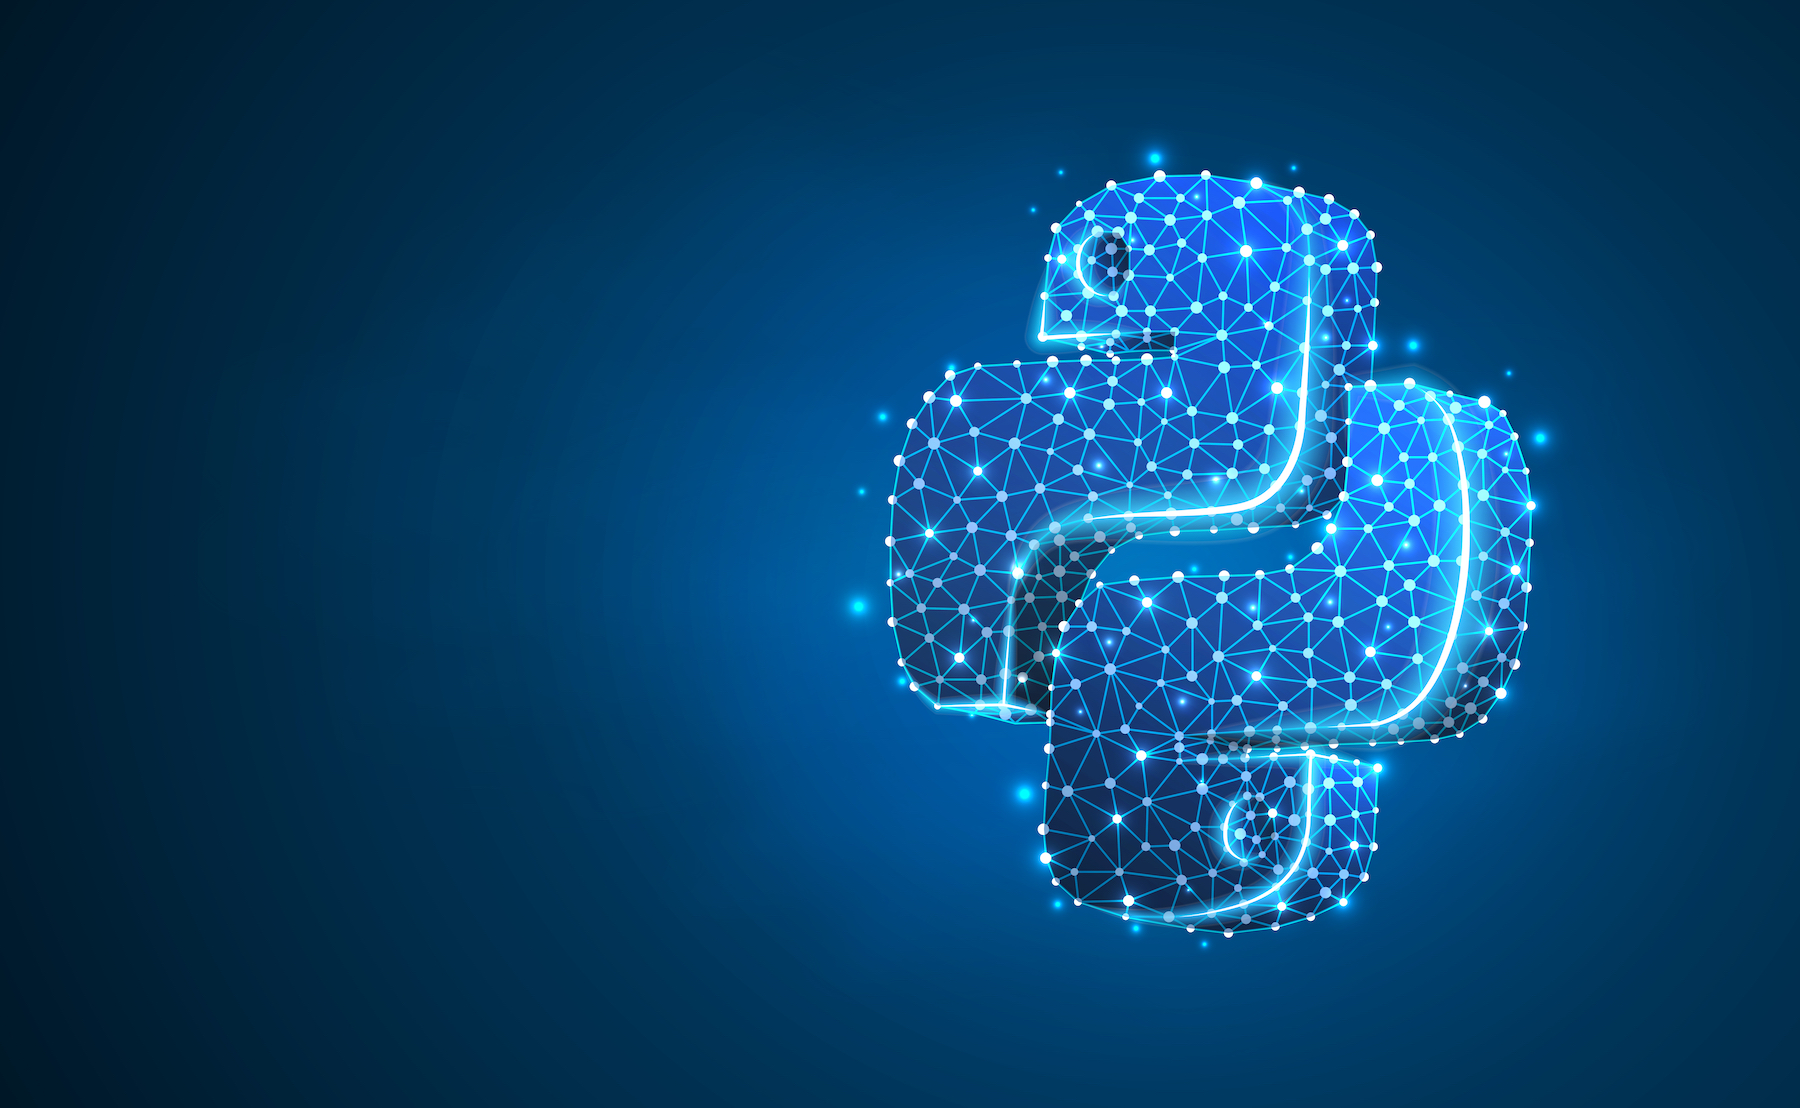 22 Python Data Science Courses and Bootcamps to Know